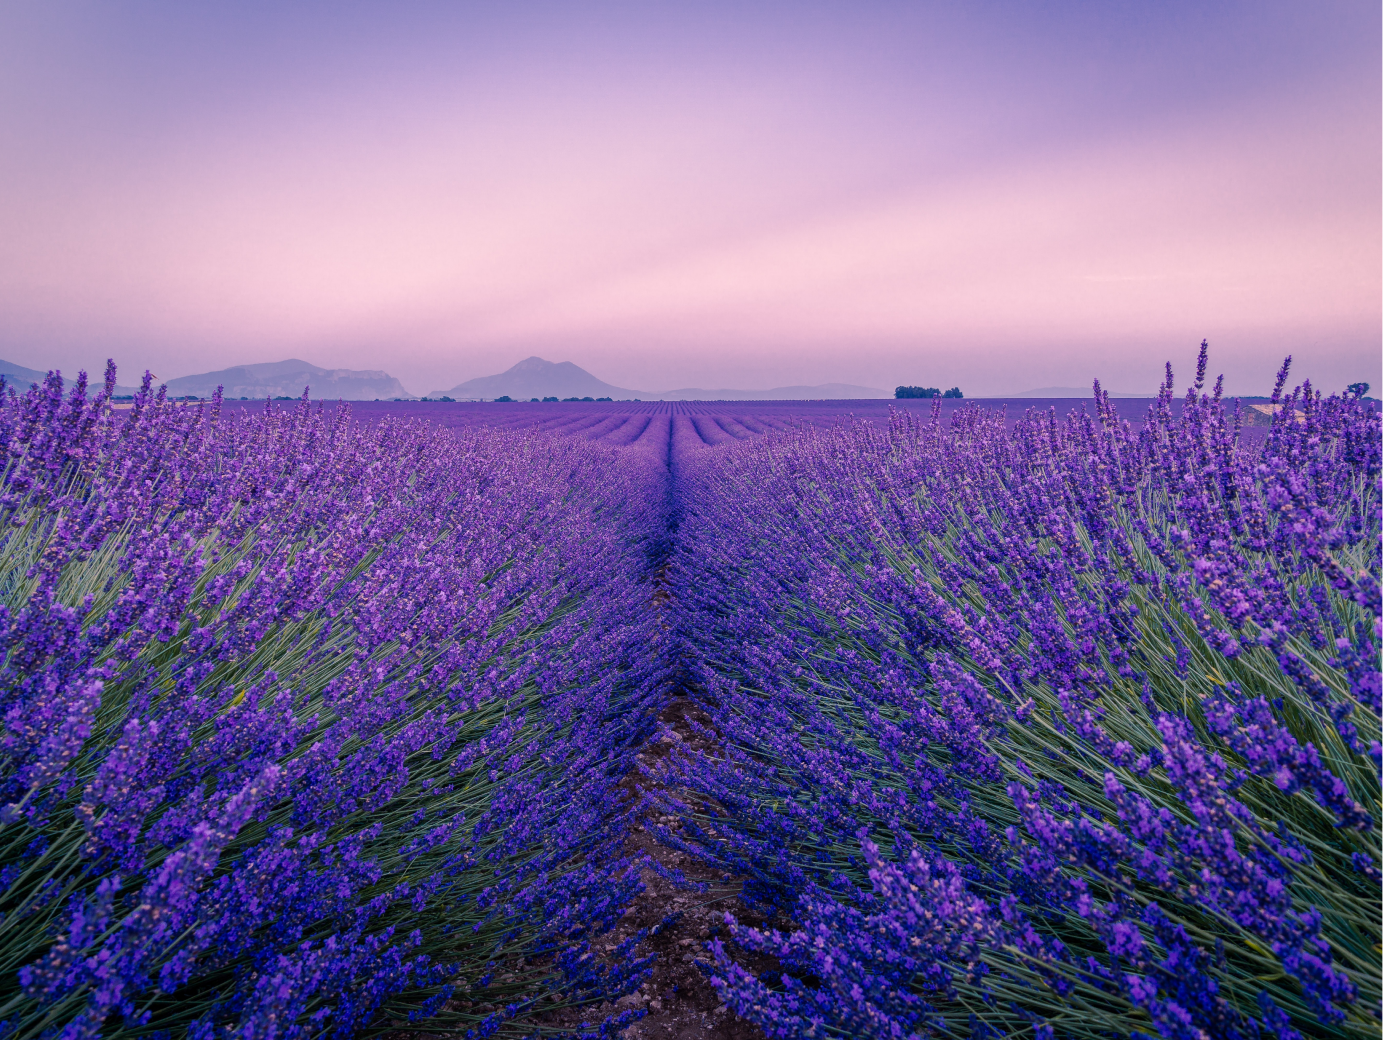 A lavender field in full bloom at dusk with mountains in the background